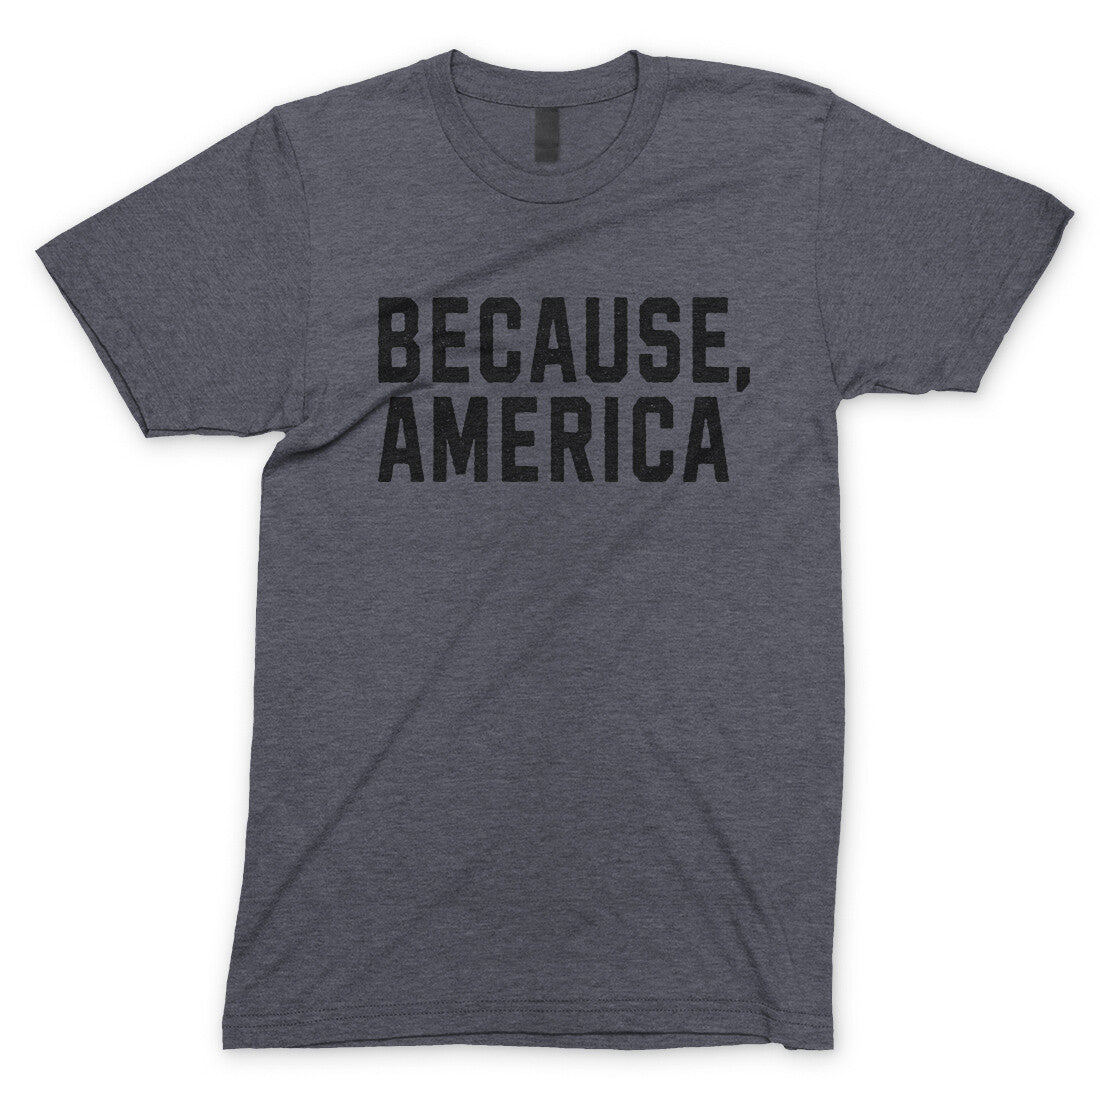 Because America in Dark Heather Color